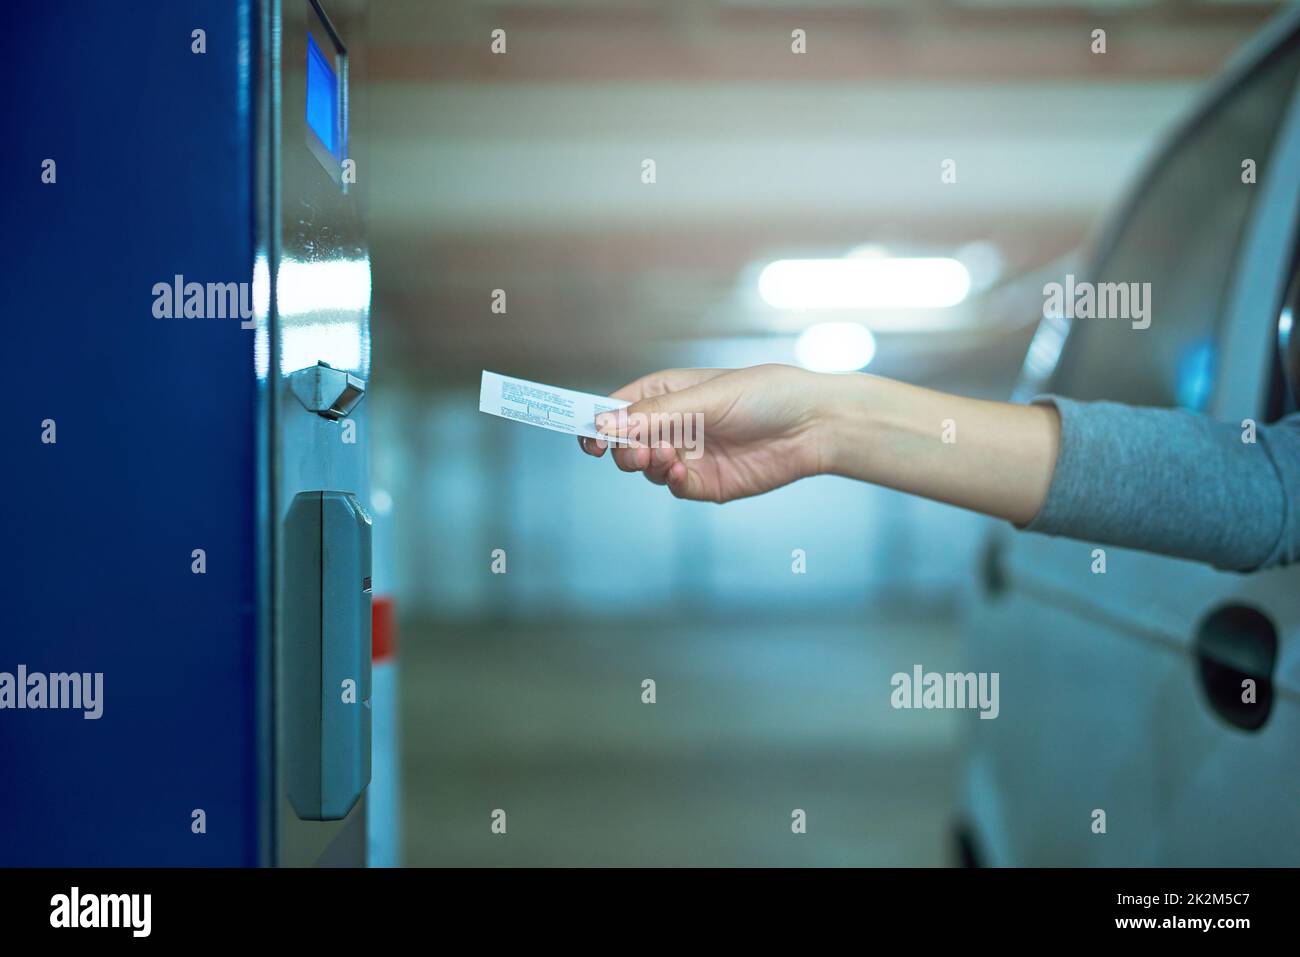 Just out of reach. Shot of an unrecognizable driver inserting a ticket into a parking meter. Stock Photo